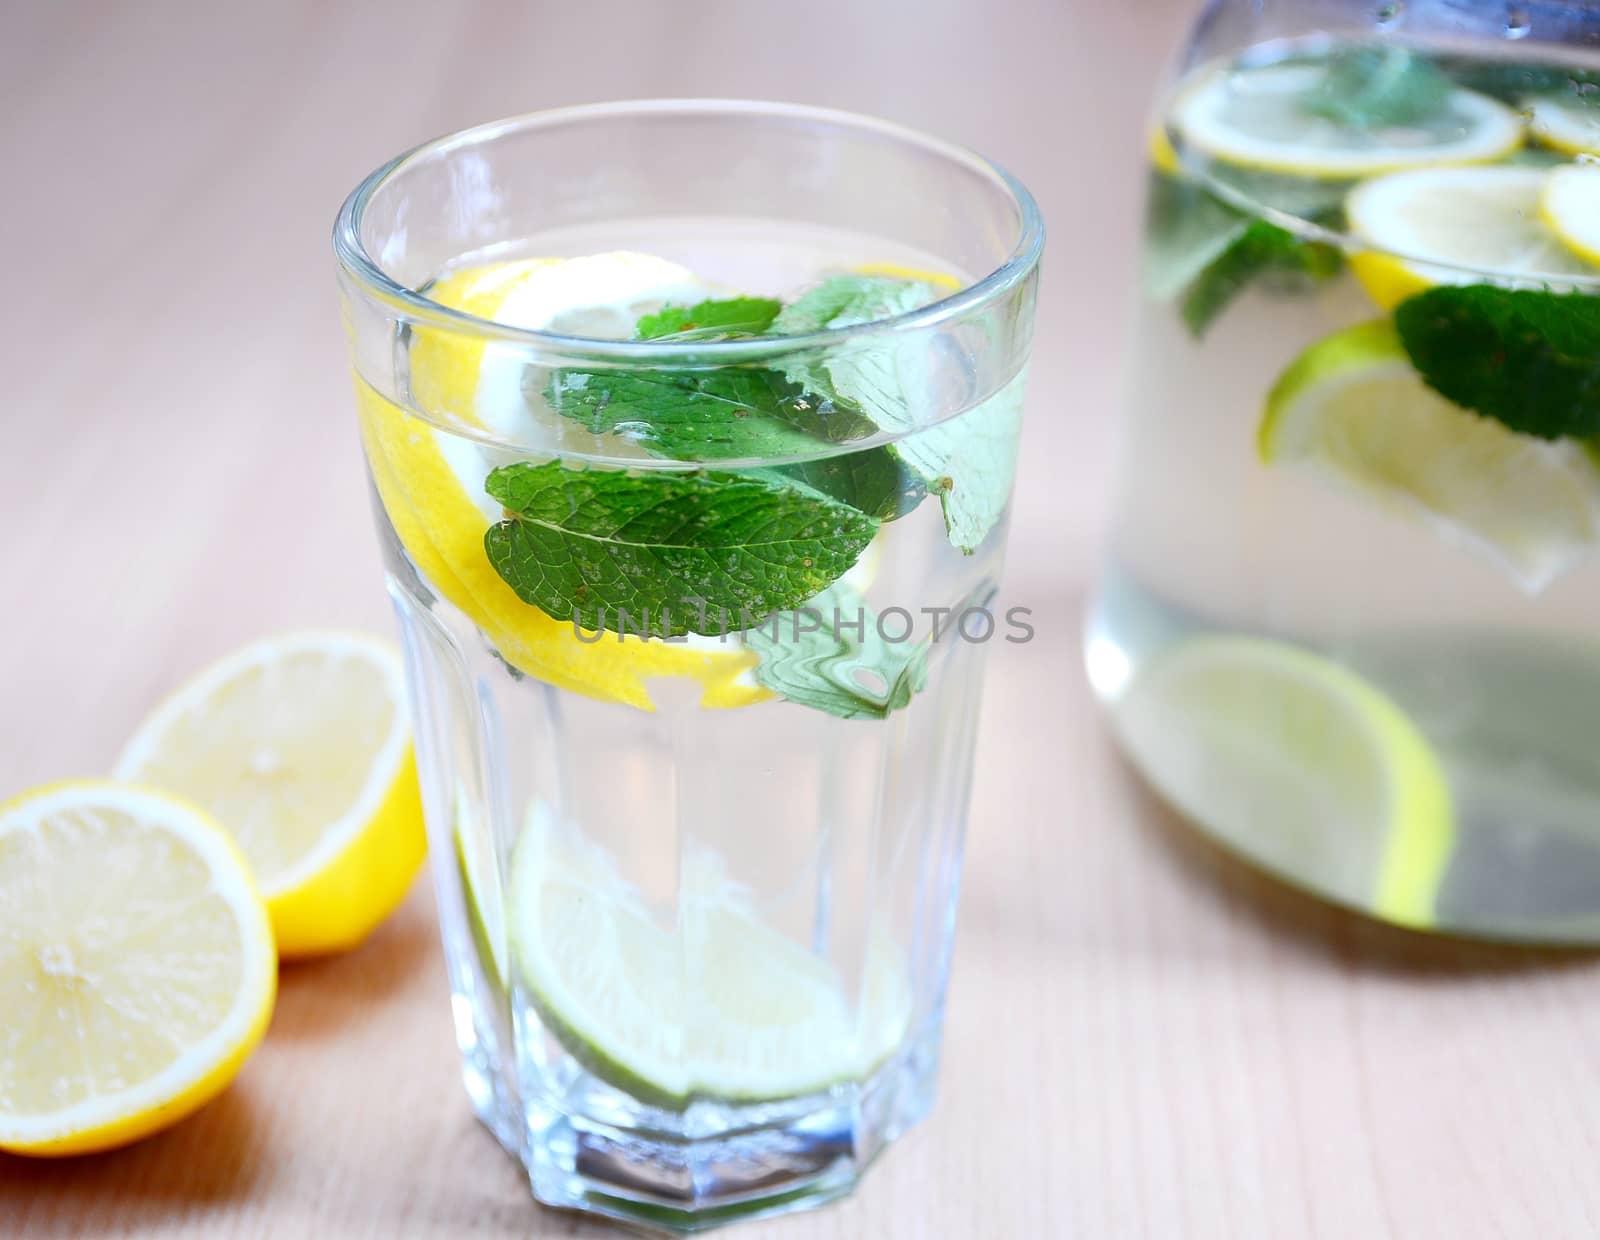 Fresh non-alcoholic drink with water, mint leaves, peaces of lemons and limes in glass.